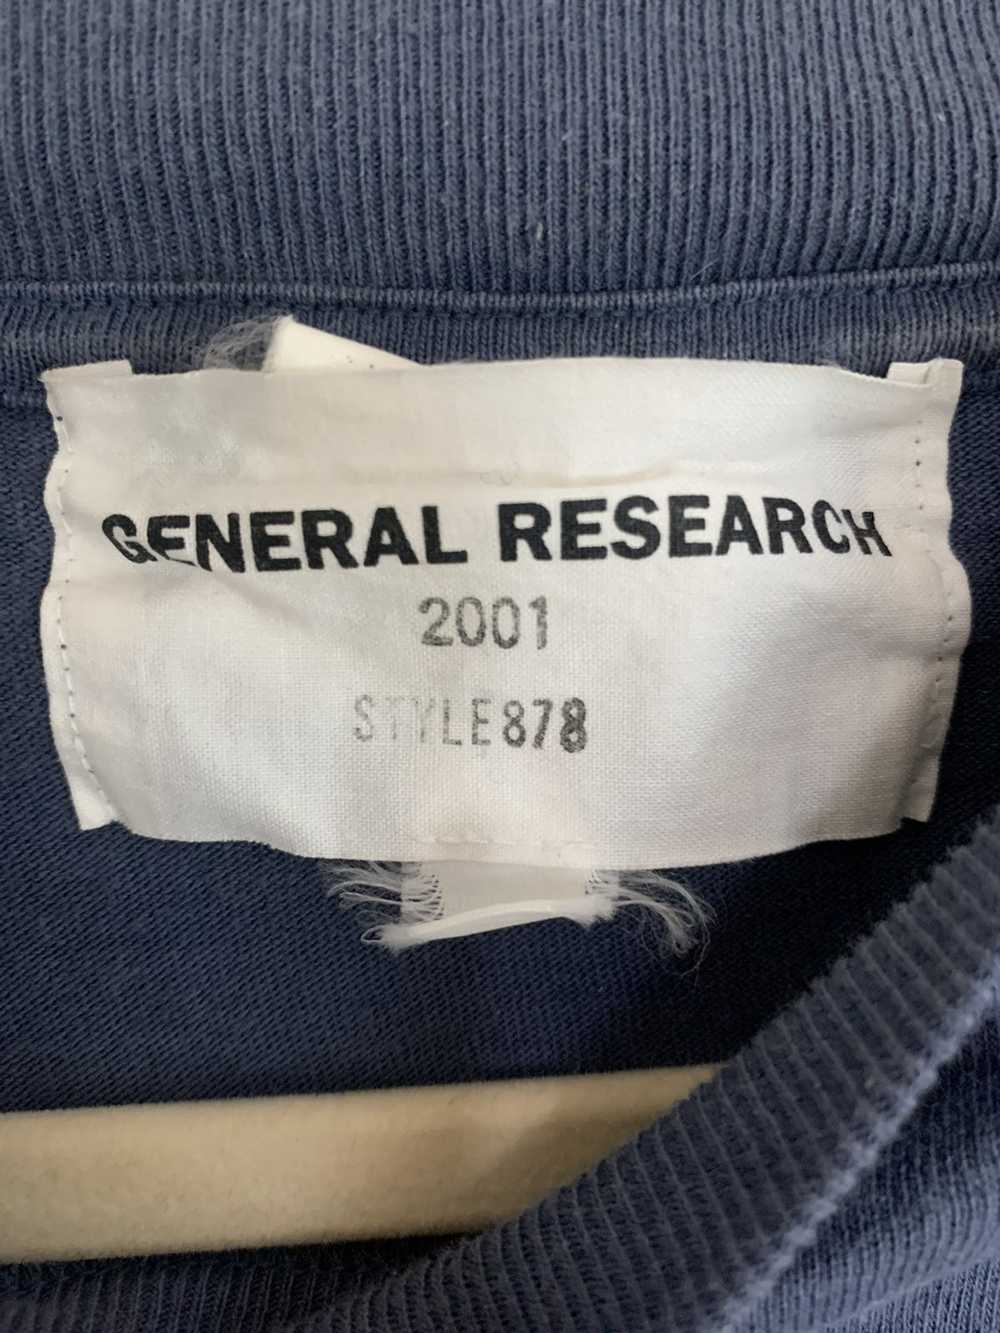 General Research × Japanese Brand 2001 General Re… - image 5